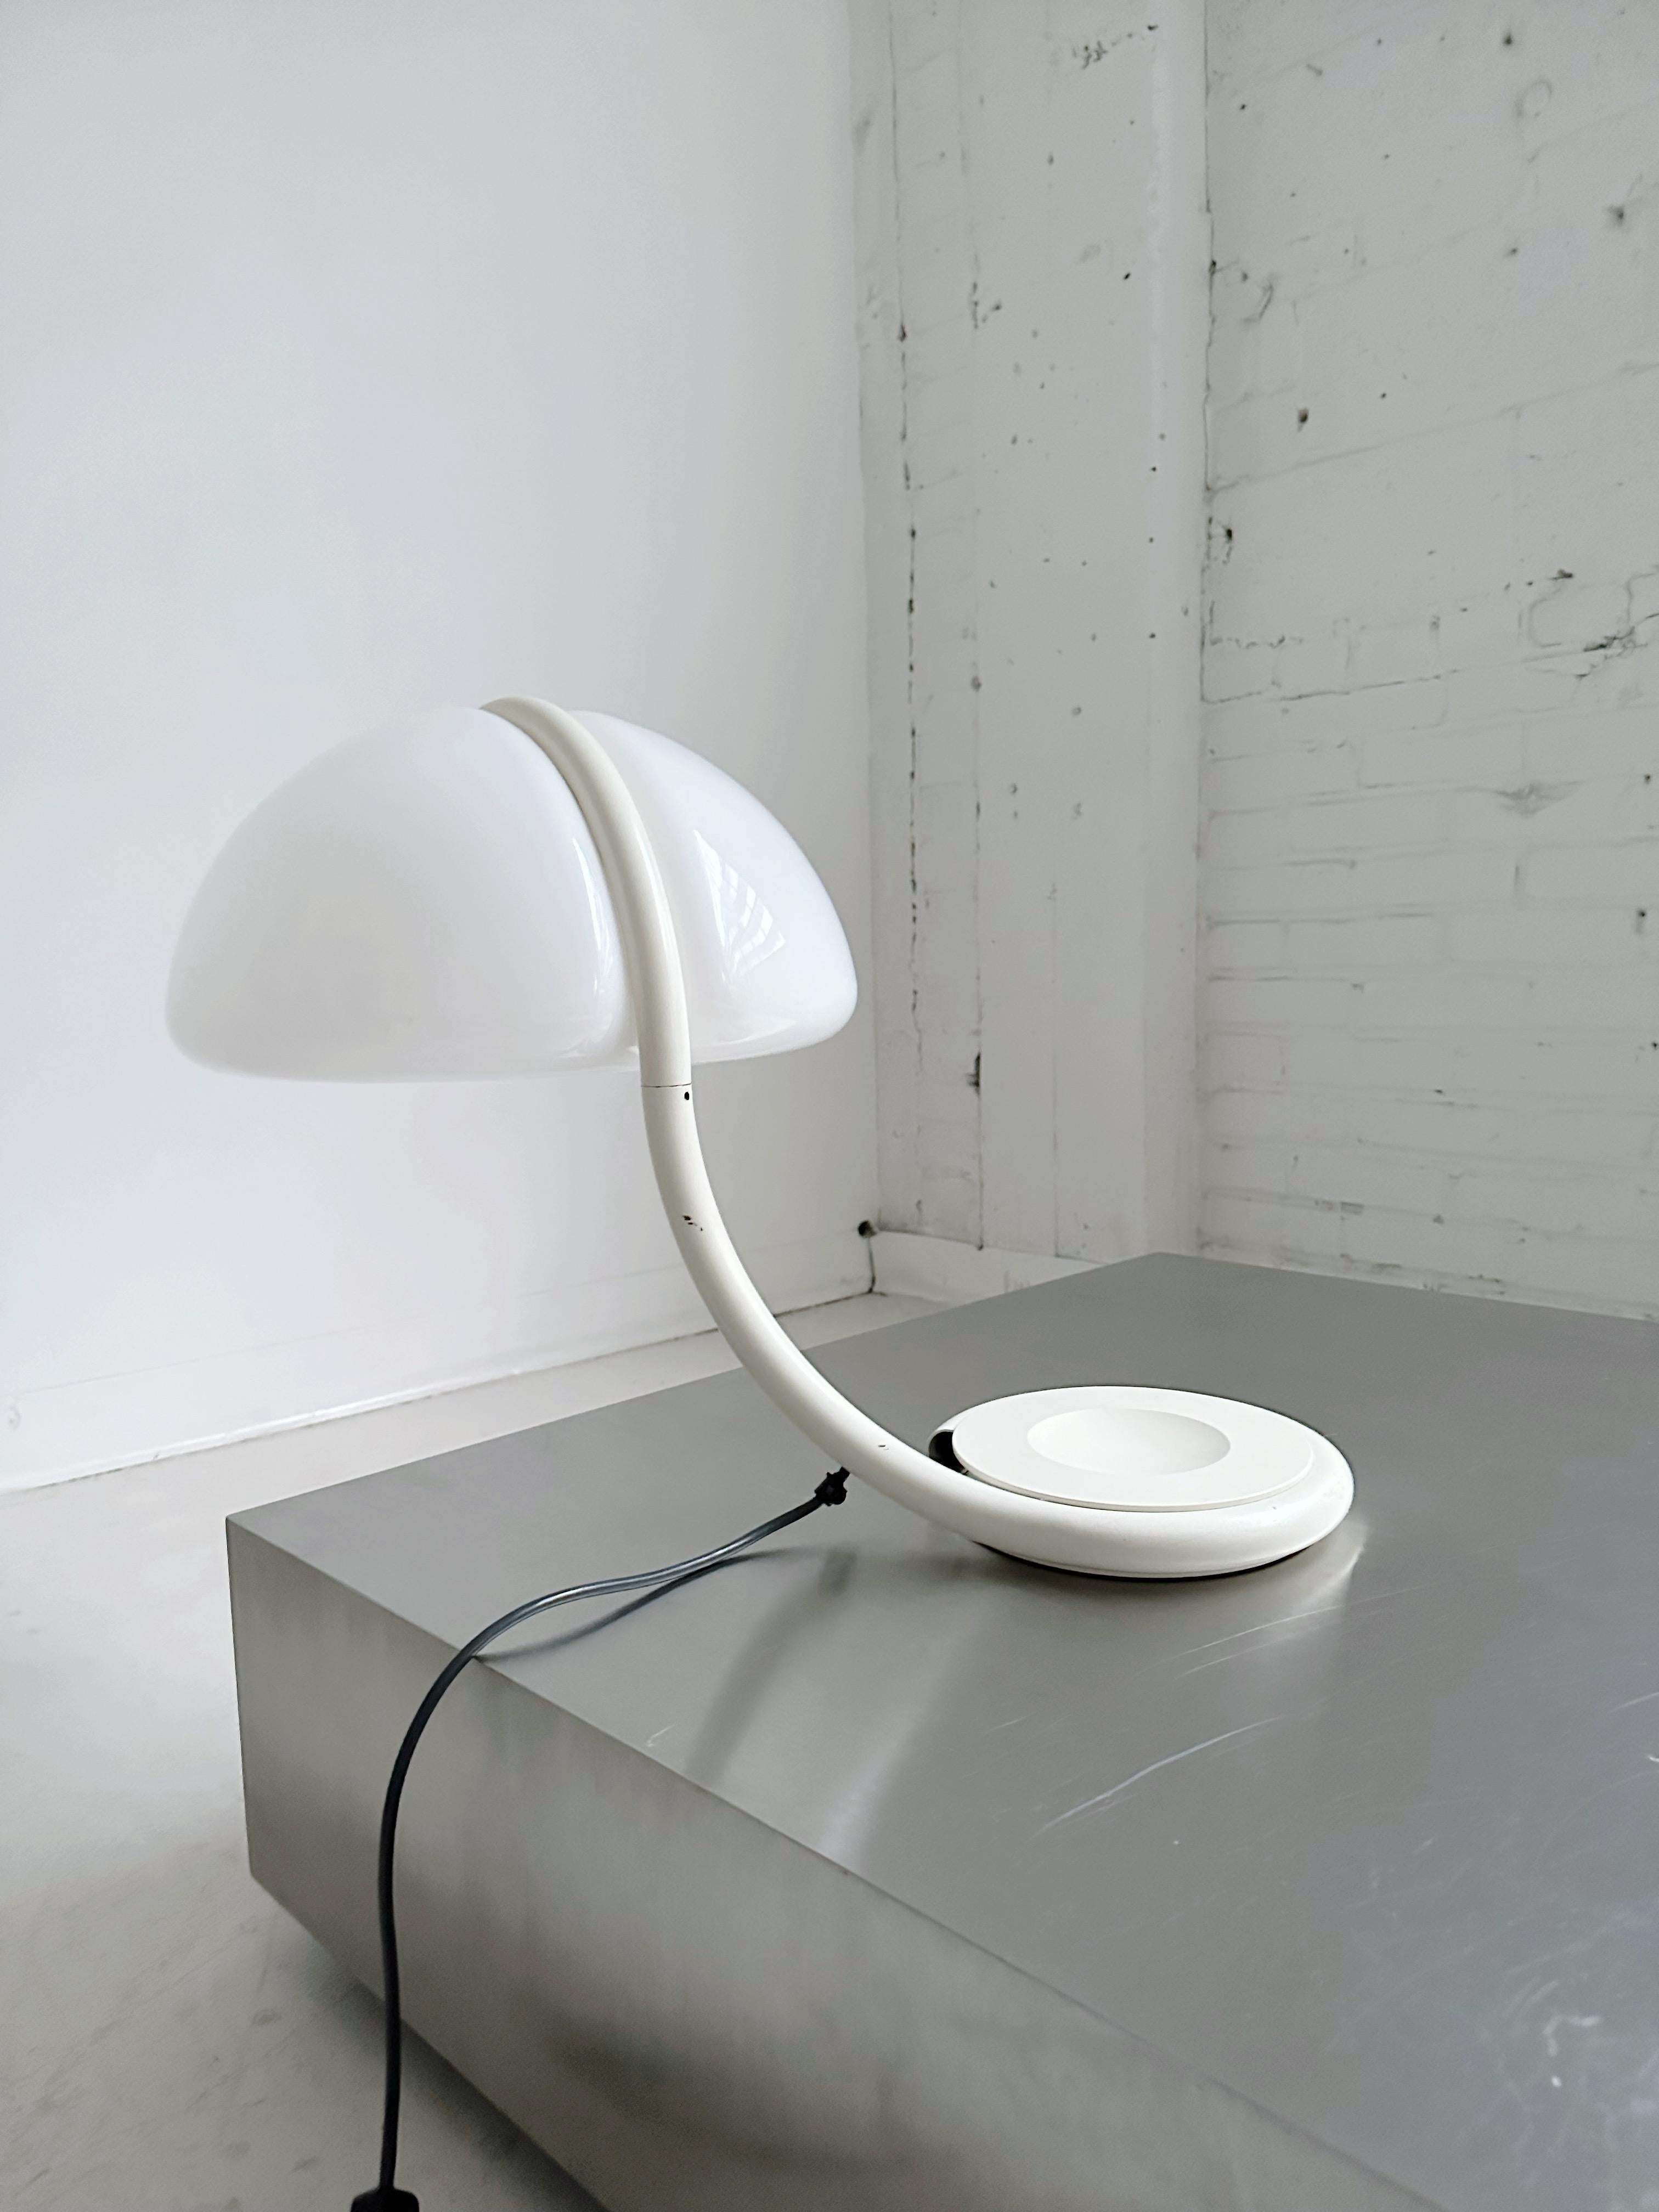 Serpente Table Lamp by Elio Martinelli for Martinelli Luce, 60's

Features a swiveling white metal arm, heavy base and white opal methacrylate diffuser

In good condition, minor signs of use and scratches on shade and frame. One small dent on the